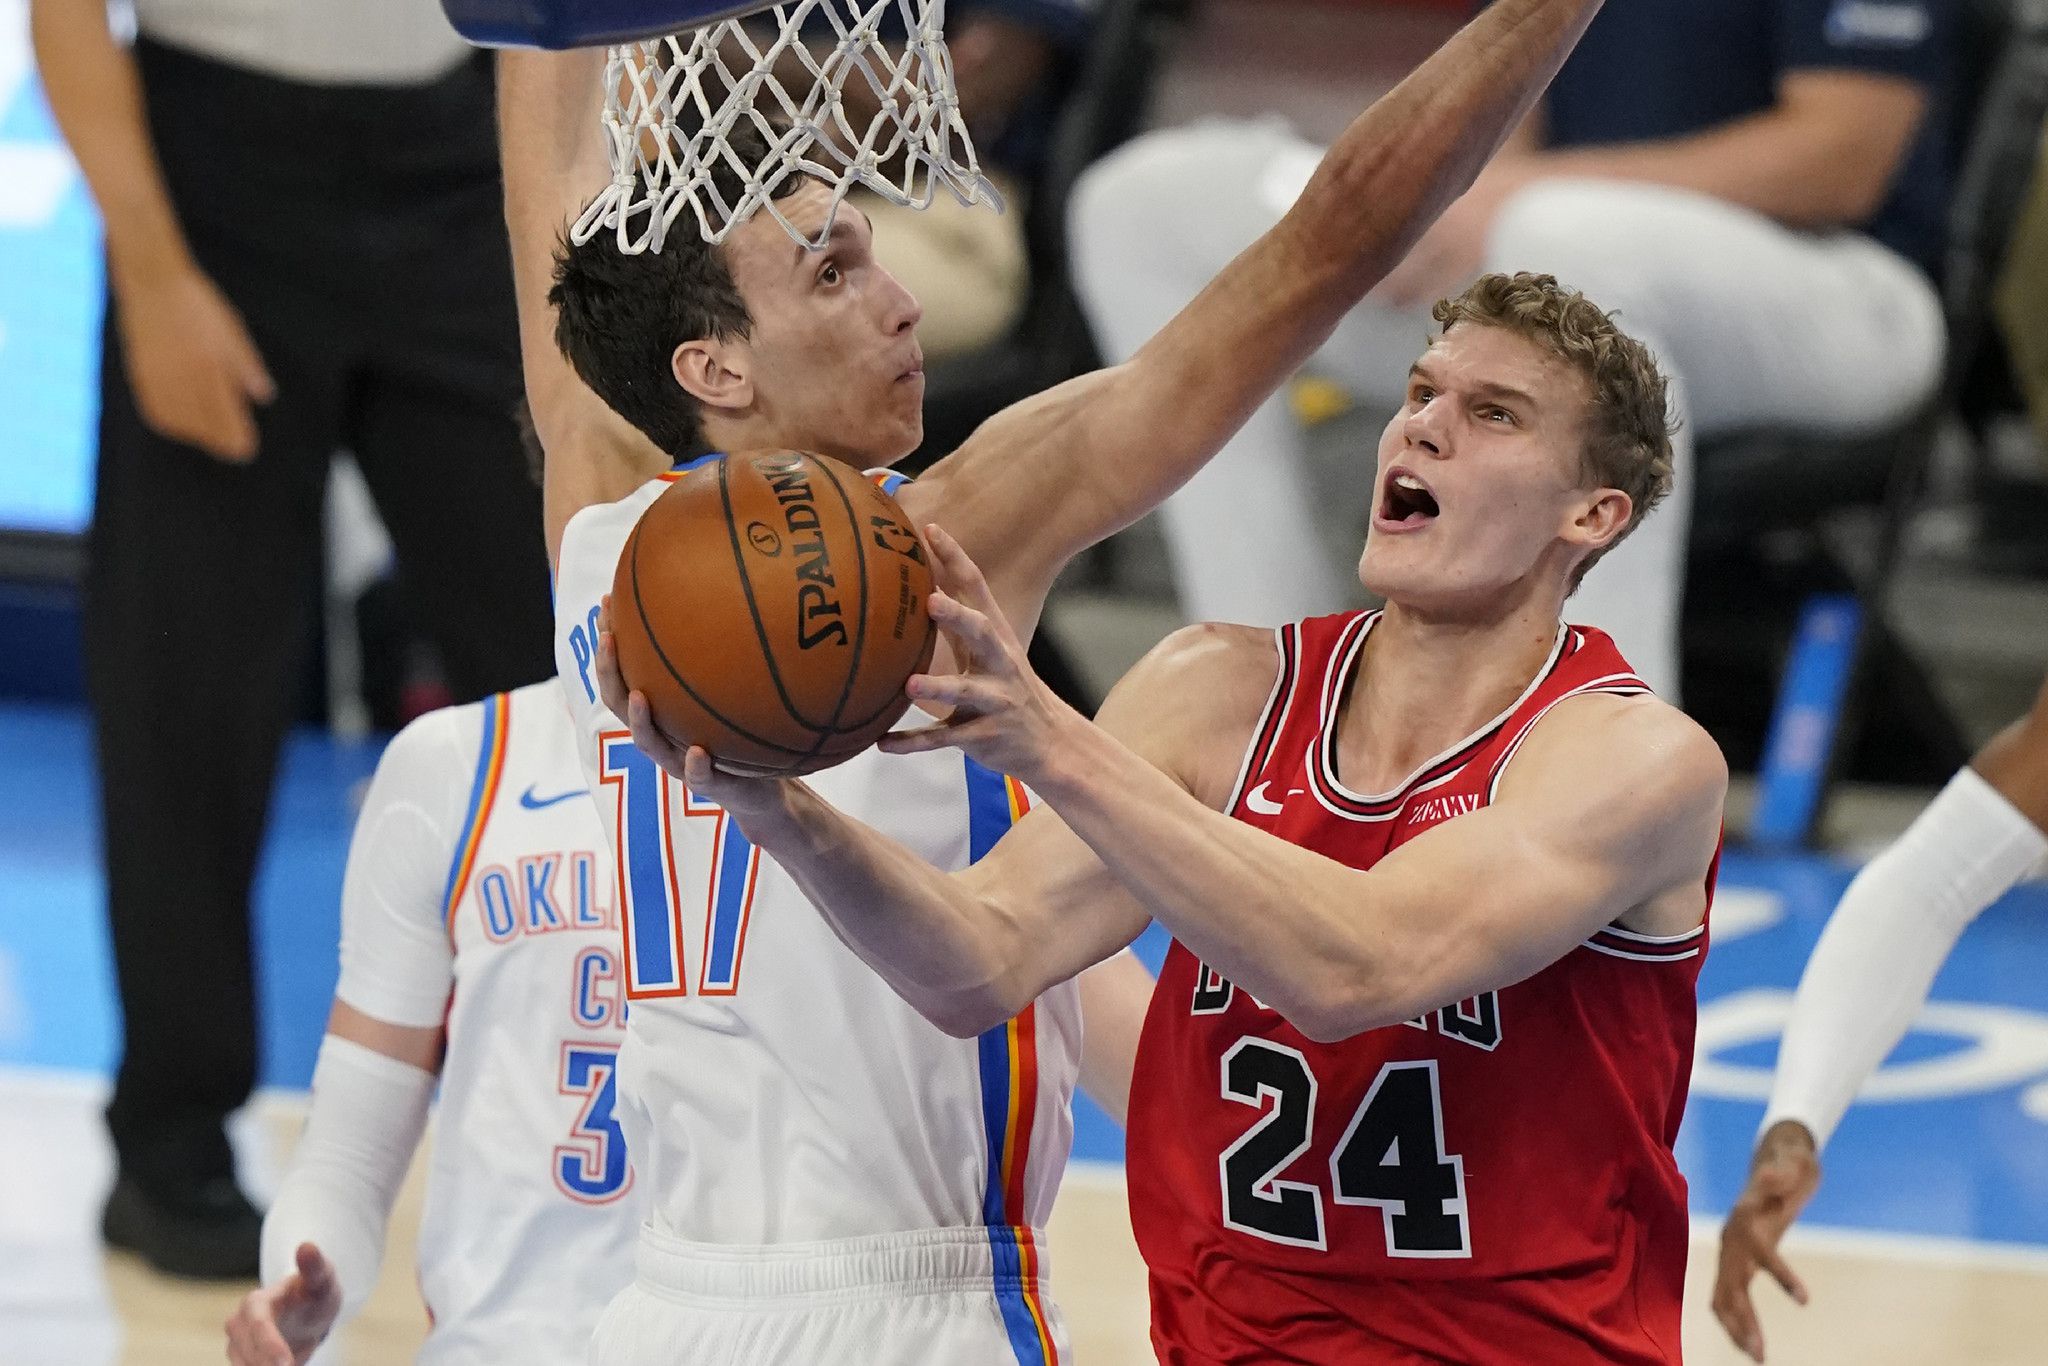 Lauri Markkanen's All-Star campaign makes a stop in Chicago